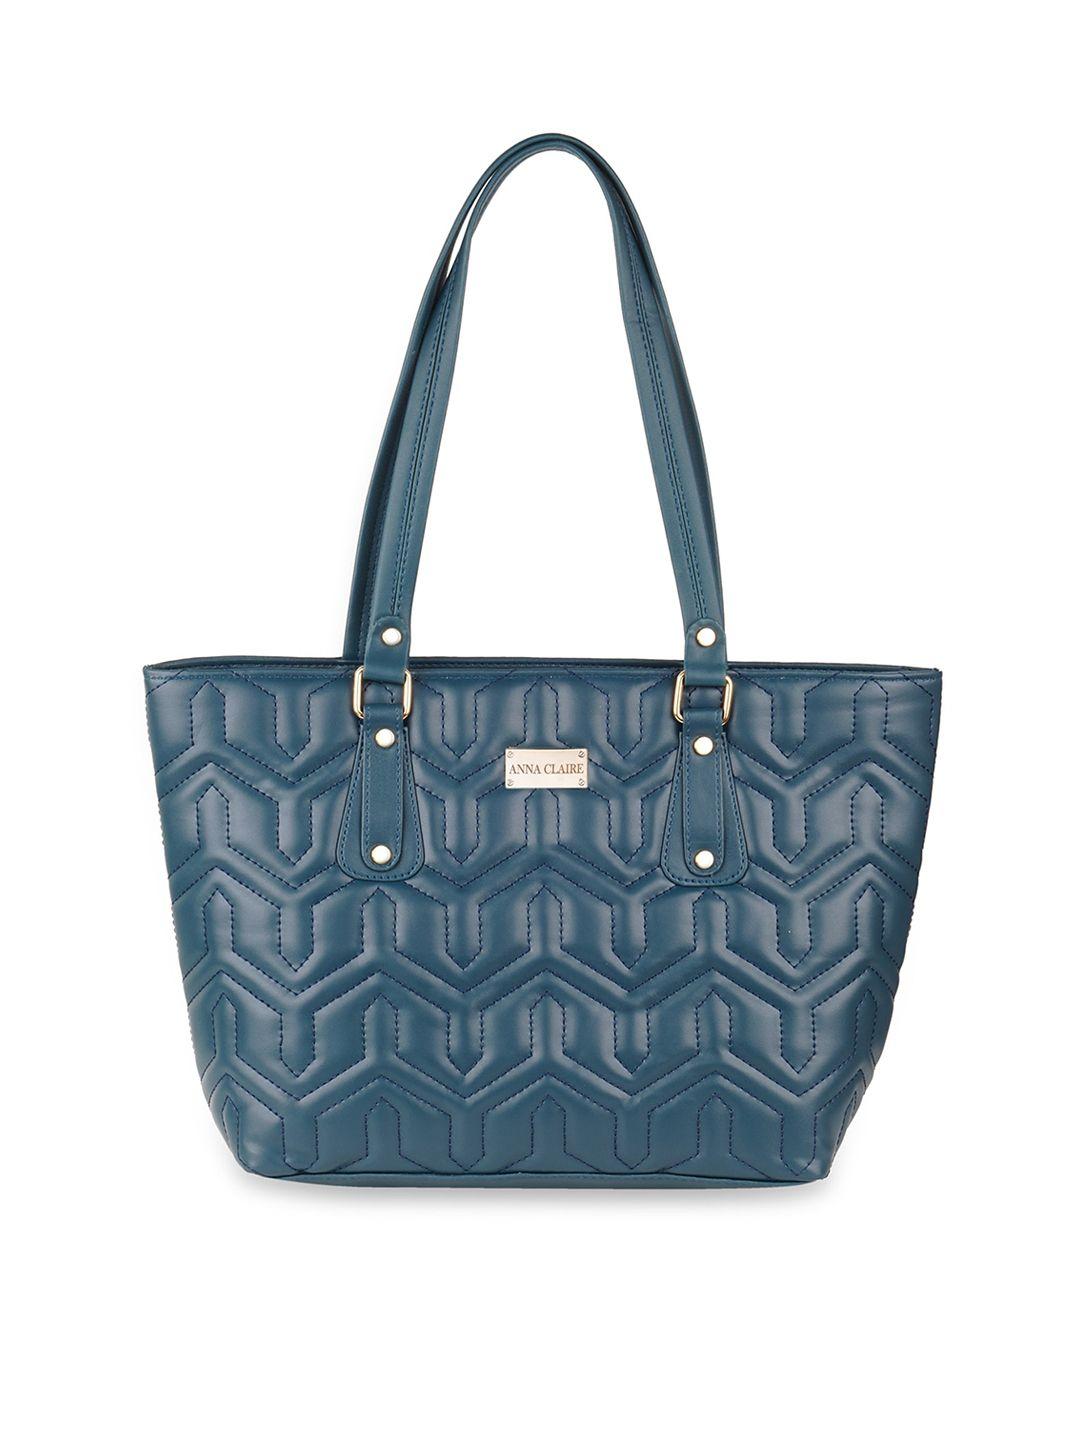 anna claire teal textured pu structured handheld bag with quilted